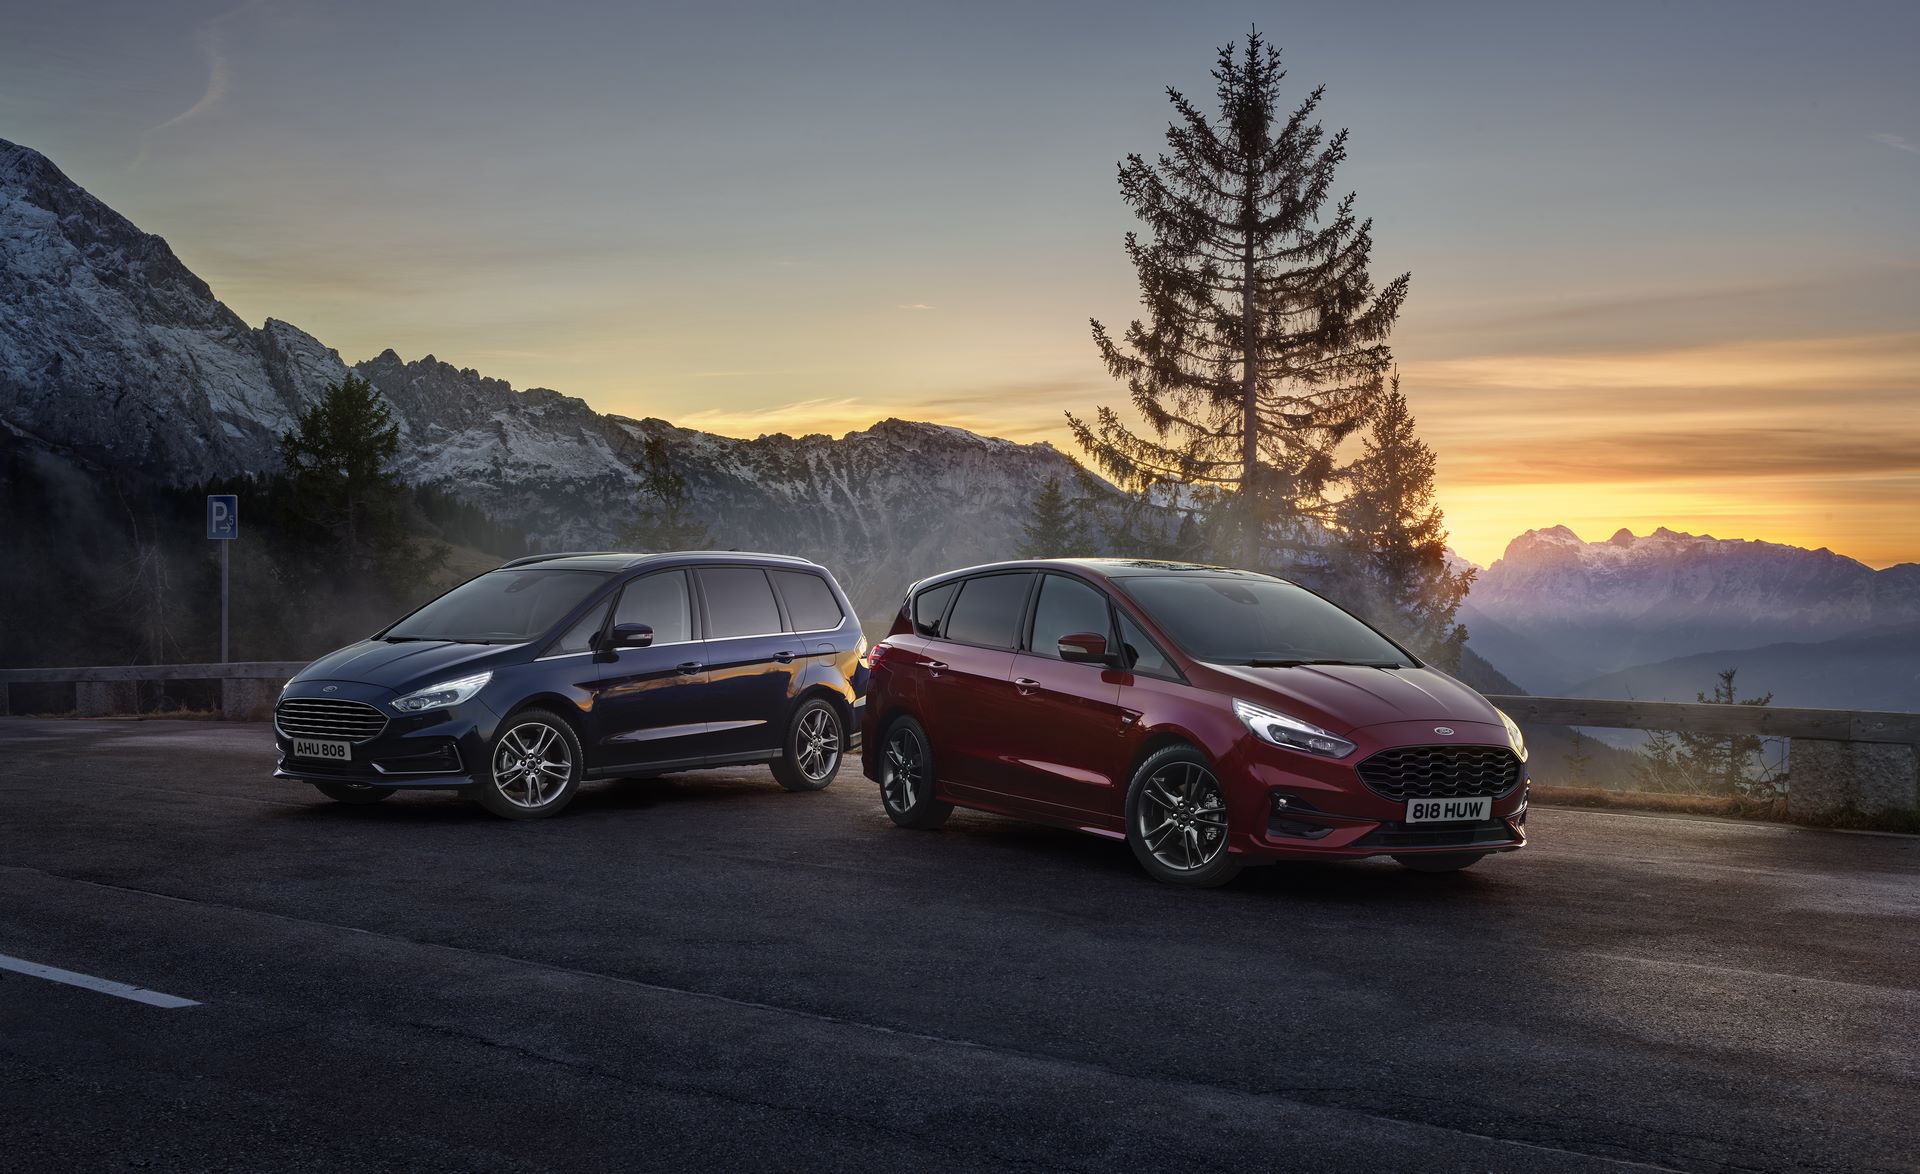 New S-MAX Hybrid Helps Active Families Go Electric and Continues Ford’s Electrification Push